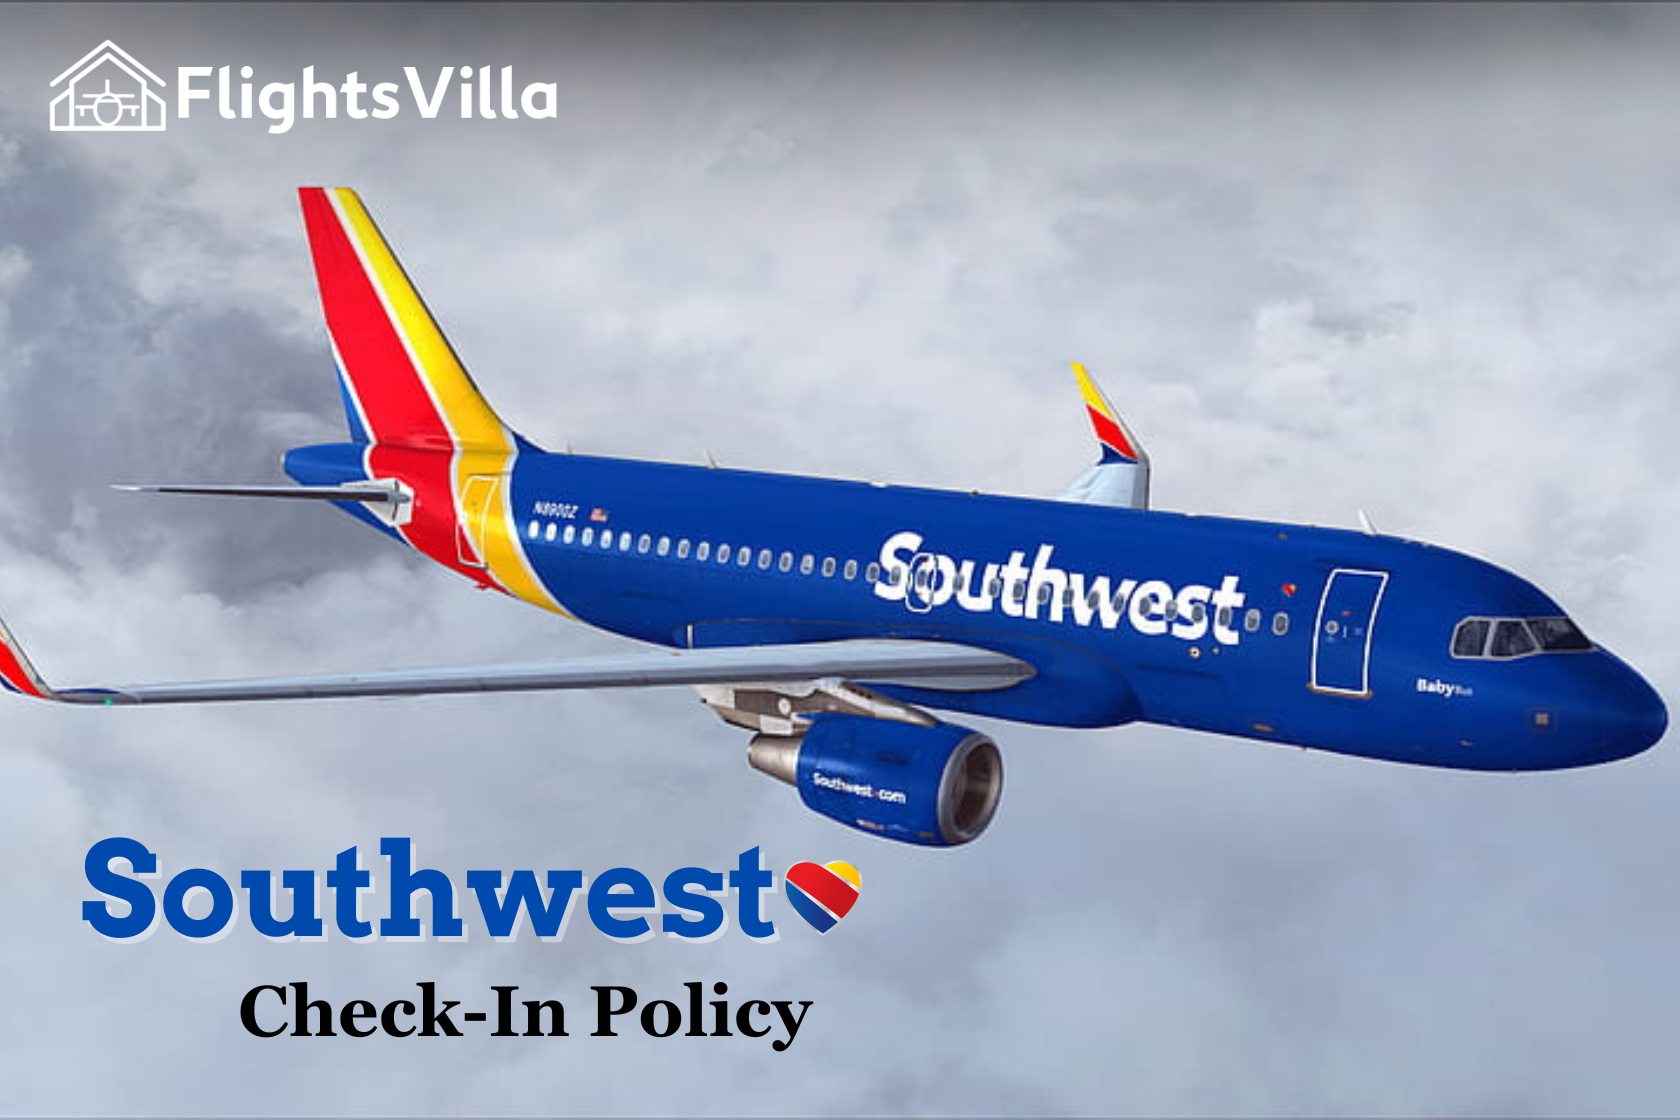 Southwest Airlines Check-In